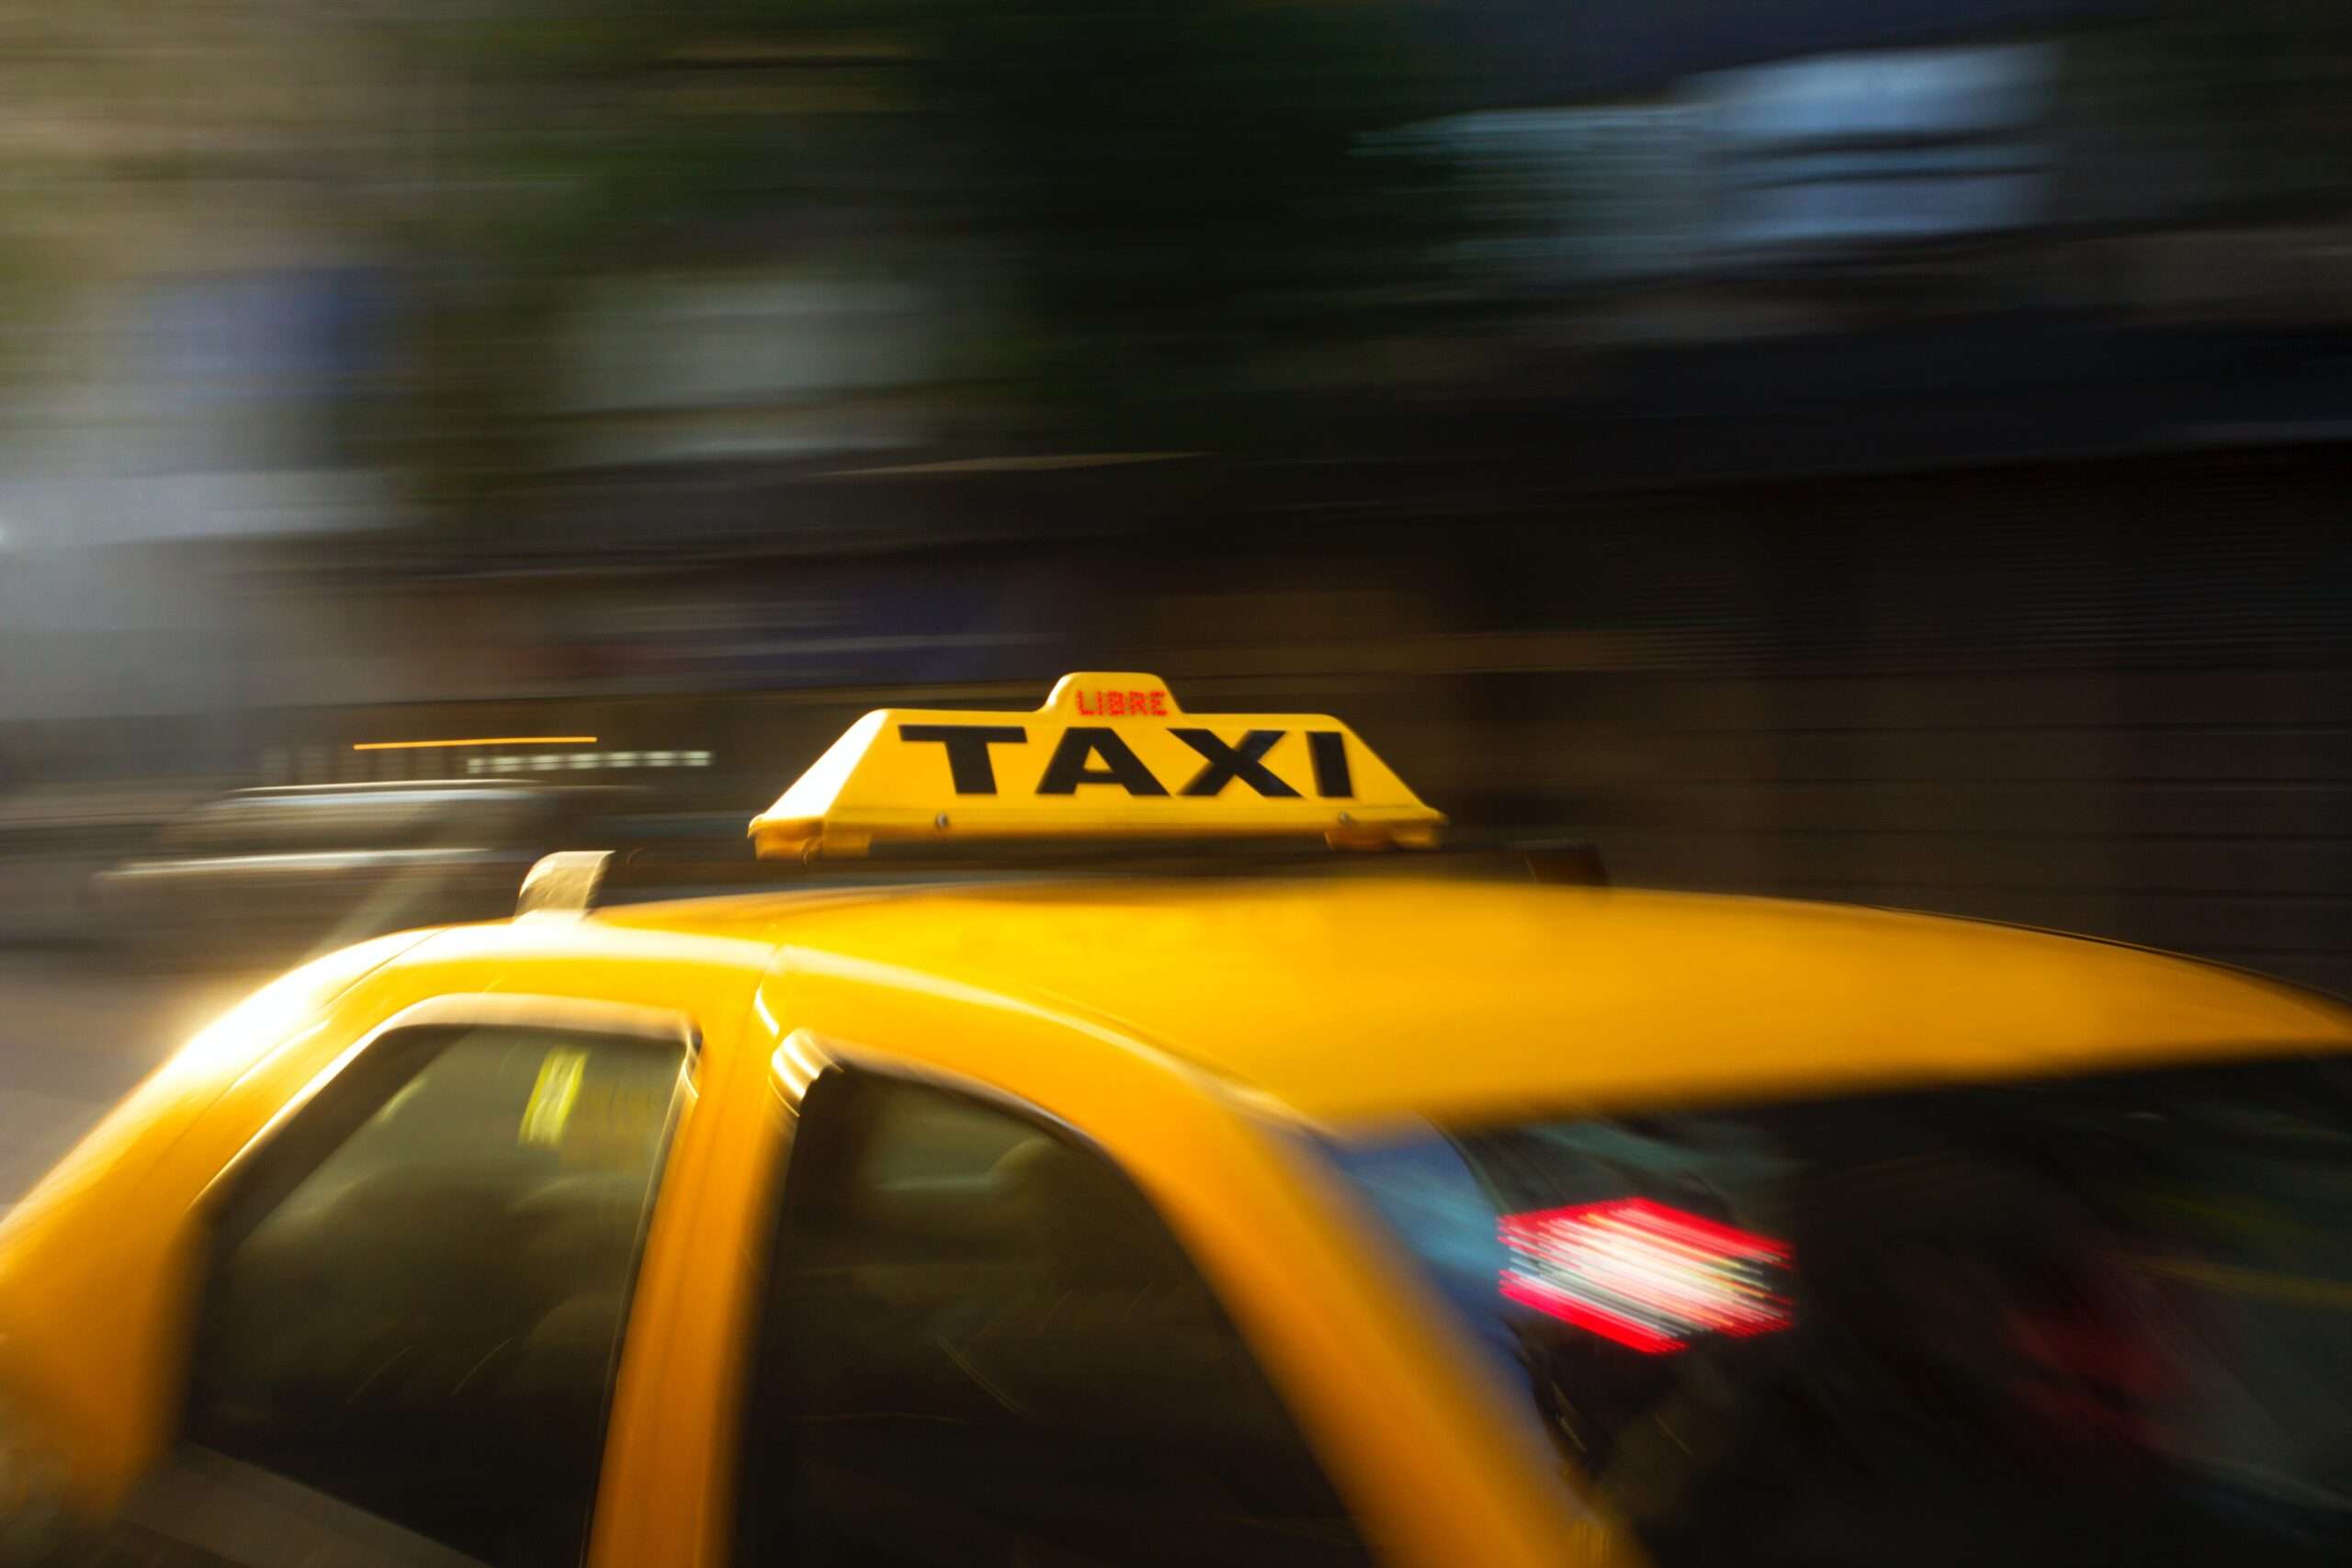 Image of a taxi